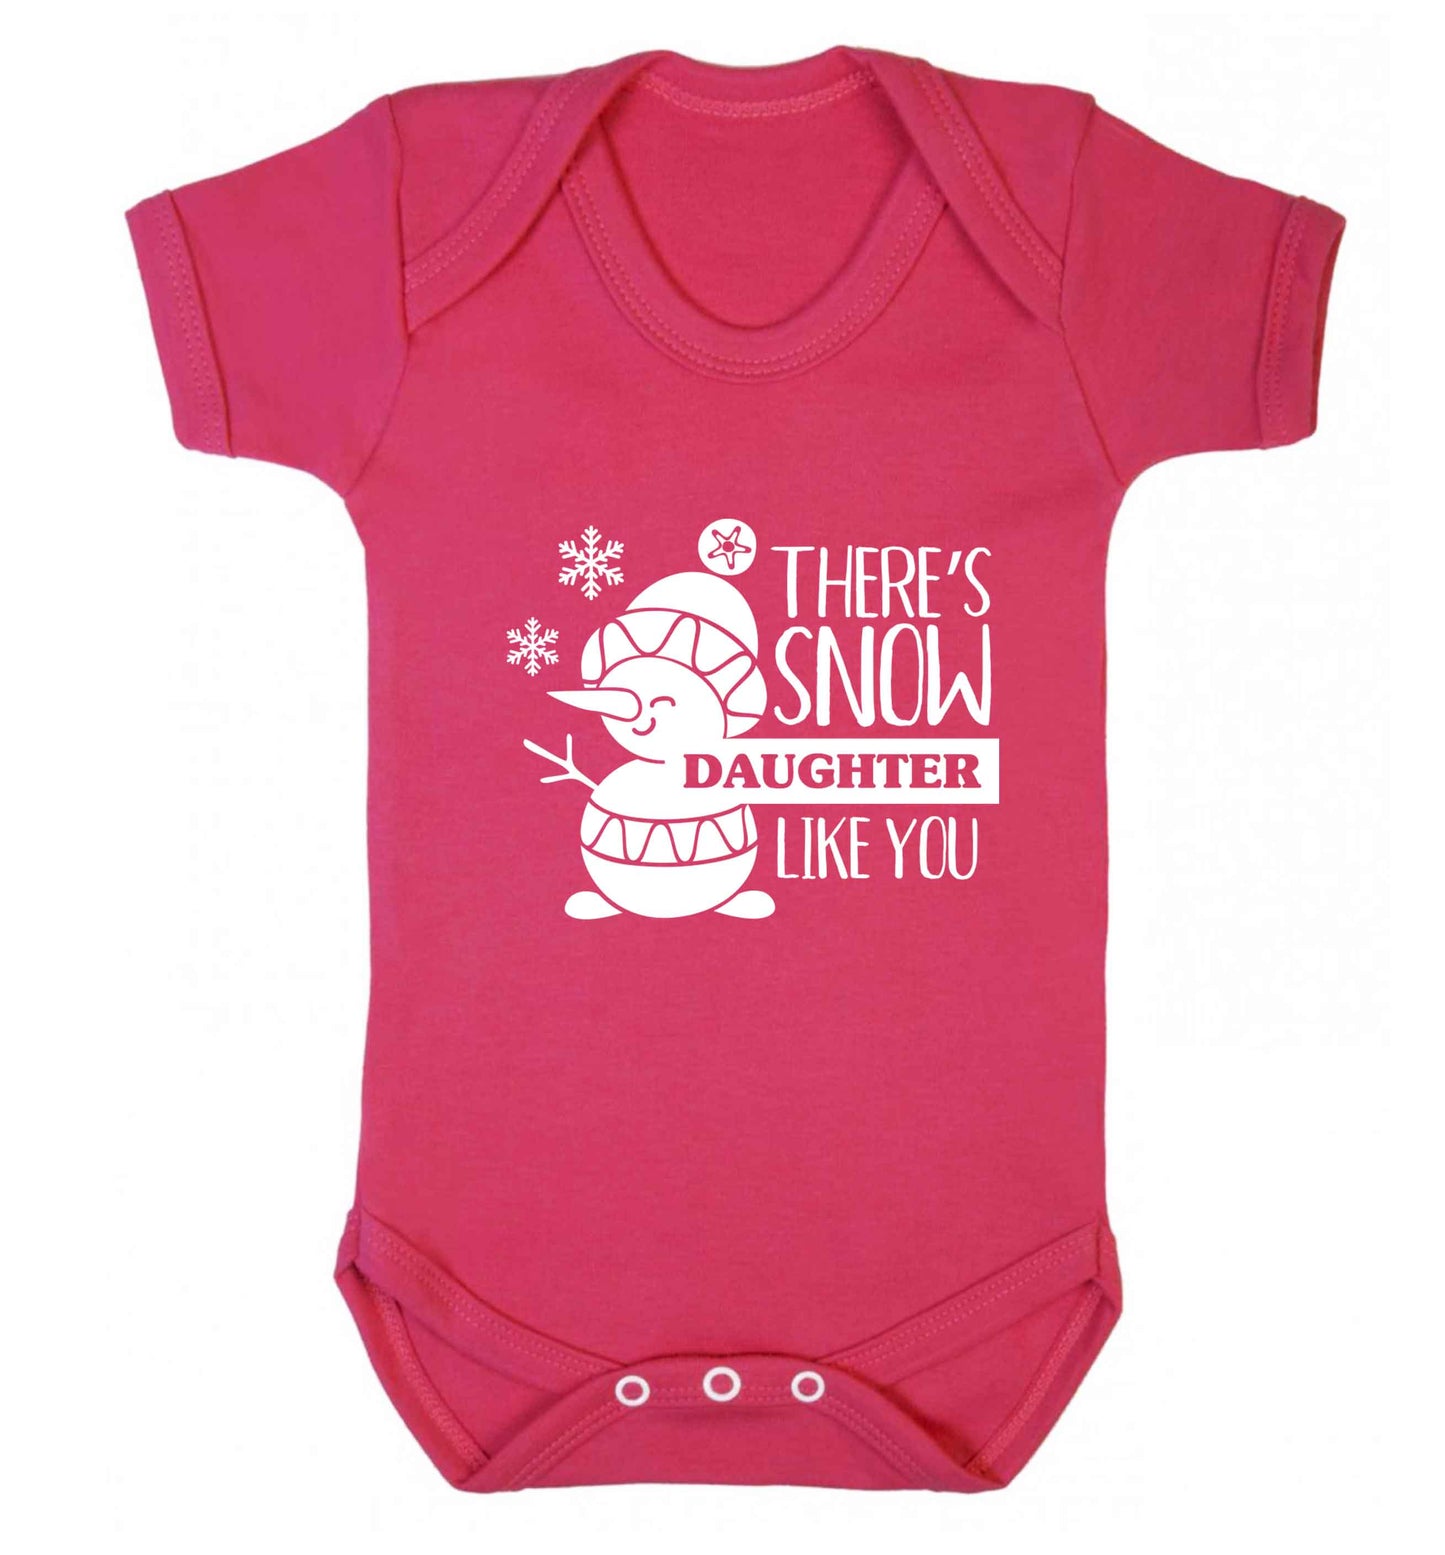 There's snow daughter like you baby vest dark pink 18-24 months